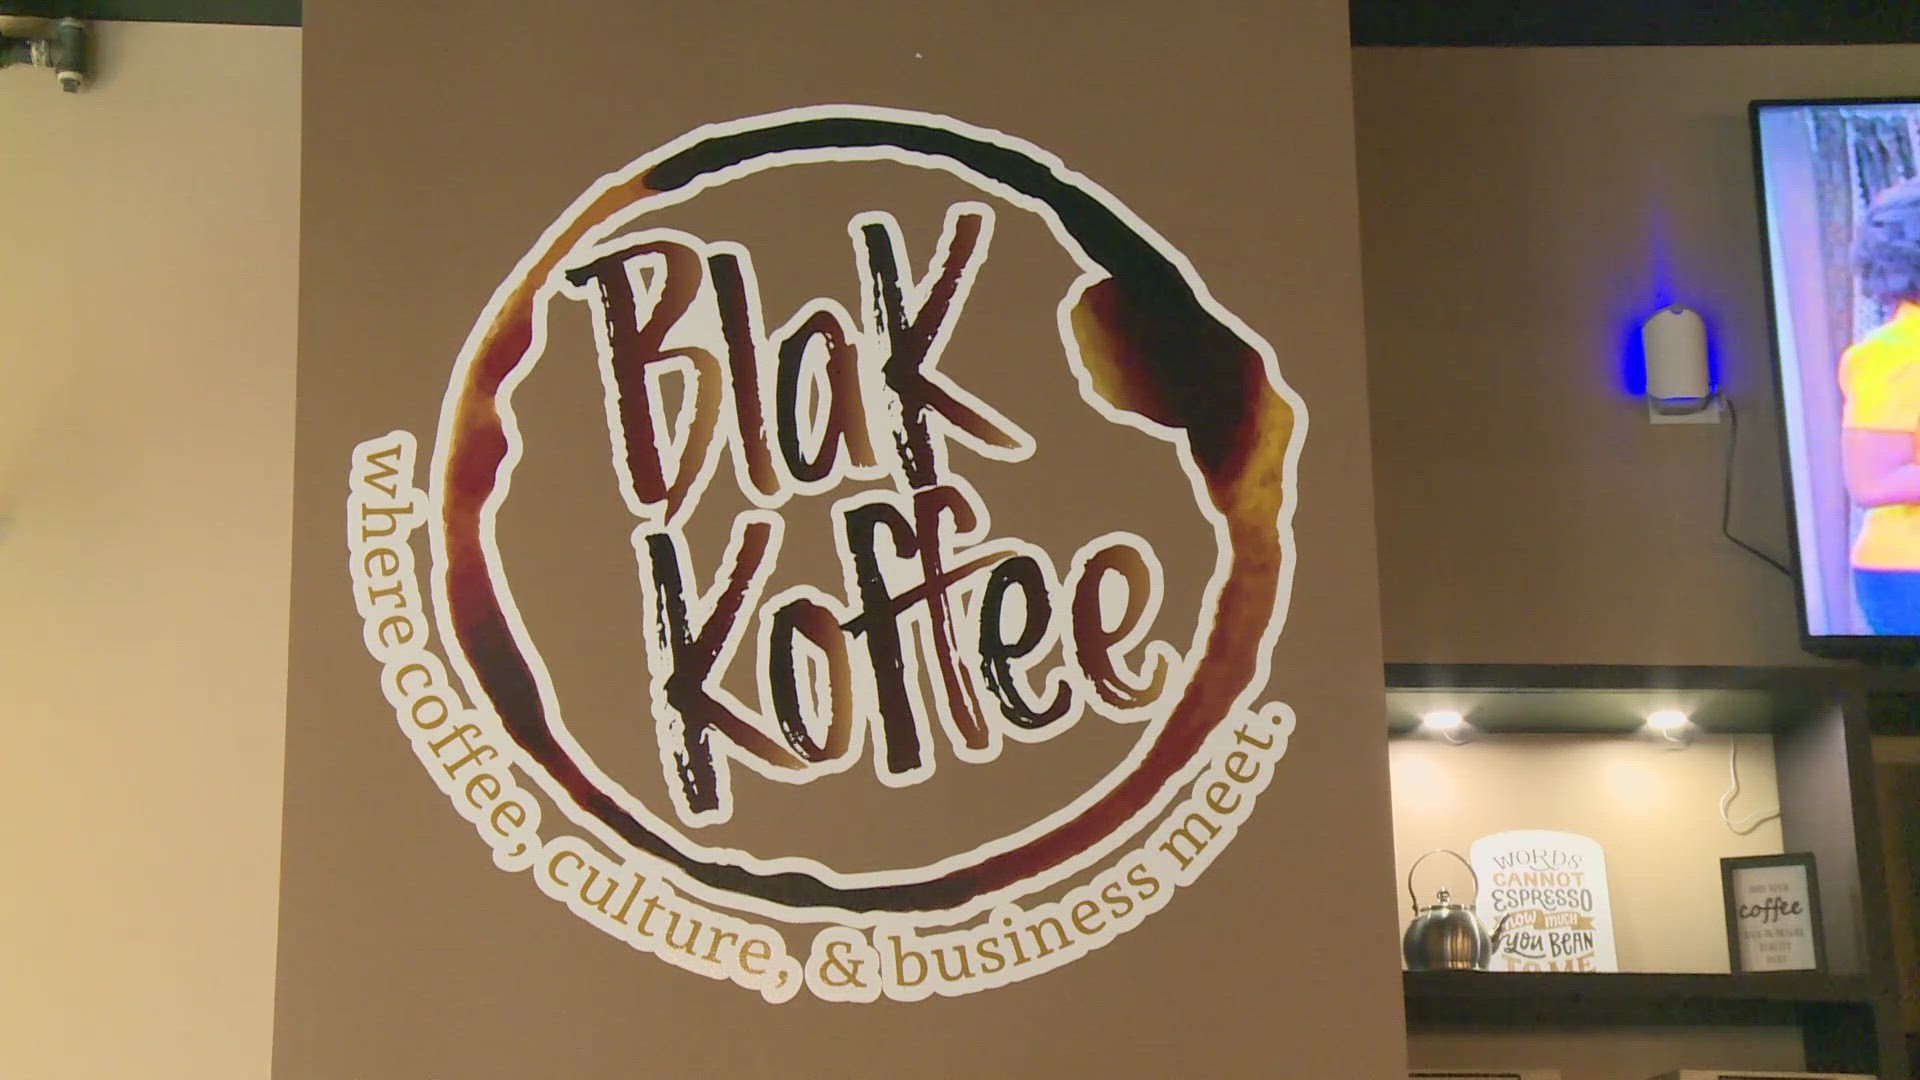 Blak Koffee is opening its second location inside the West Louisville Opportunity Center.